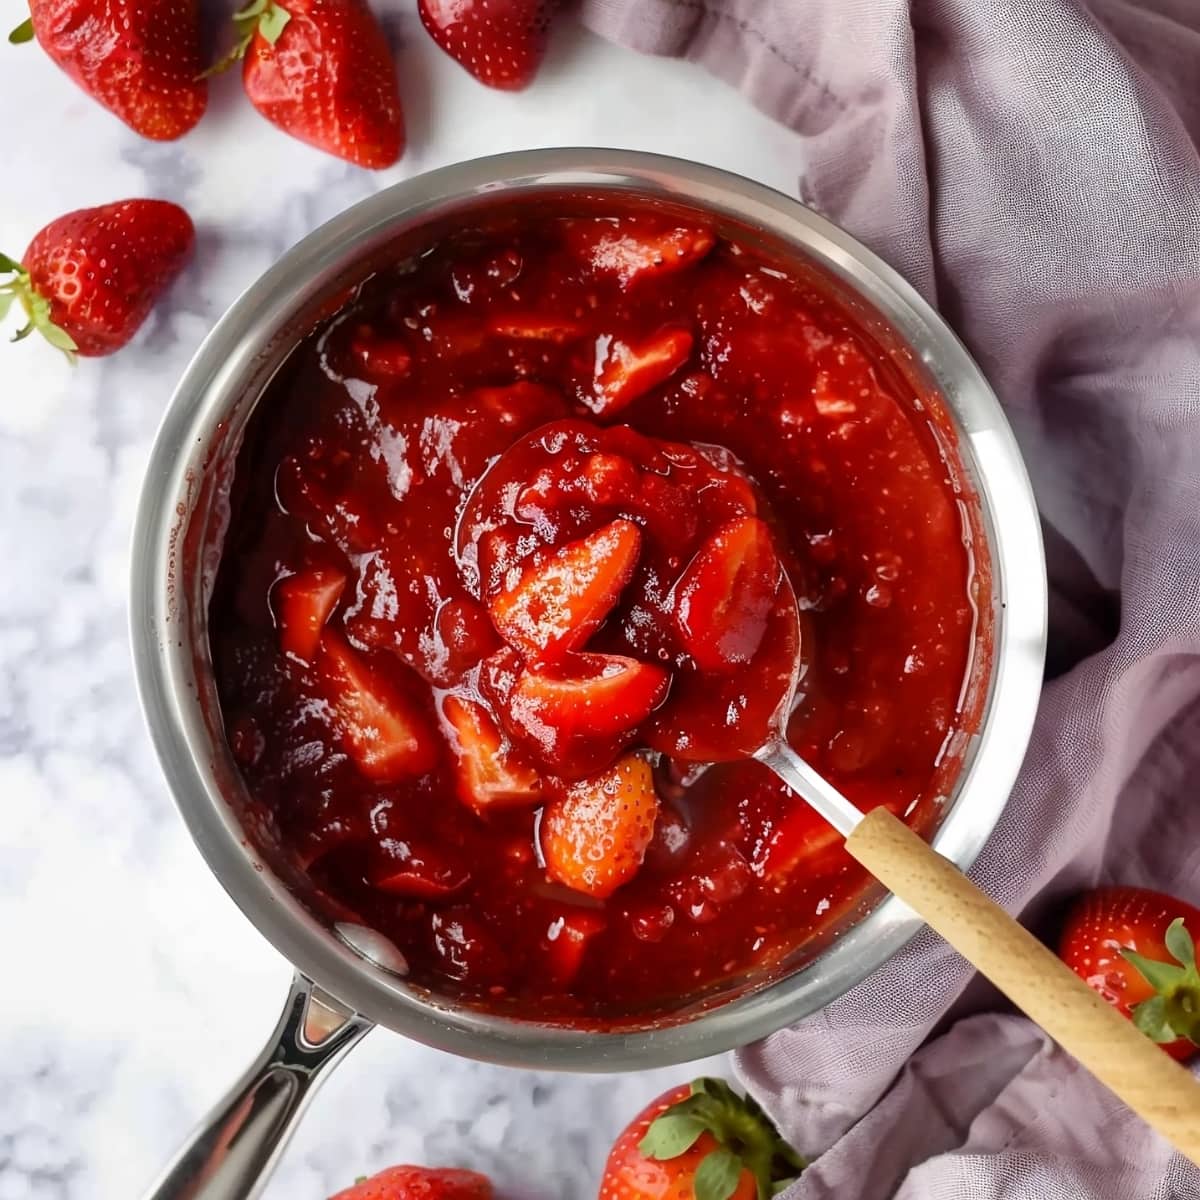 Strawberry jam in a sauce pan, over-head view